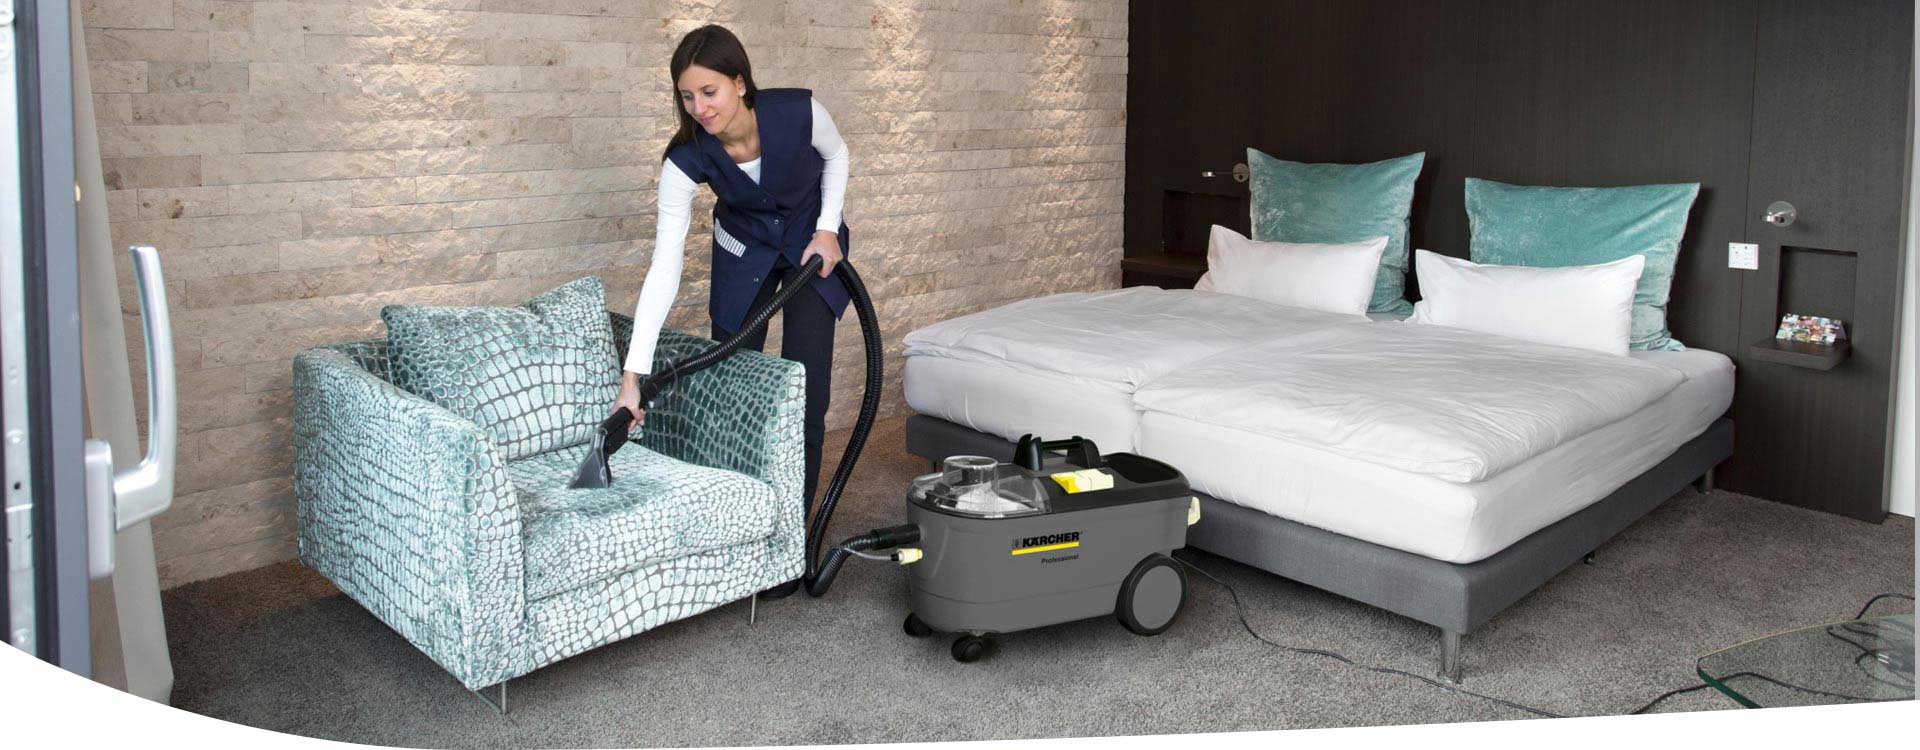 Hotel Cleaning Service Delhi